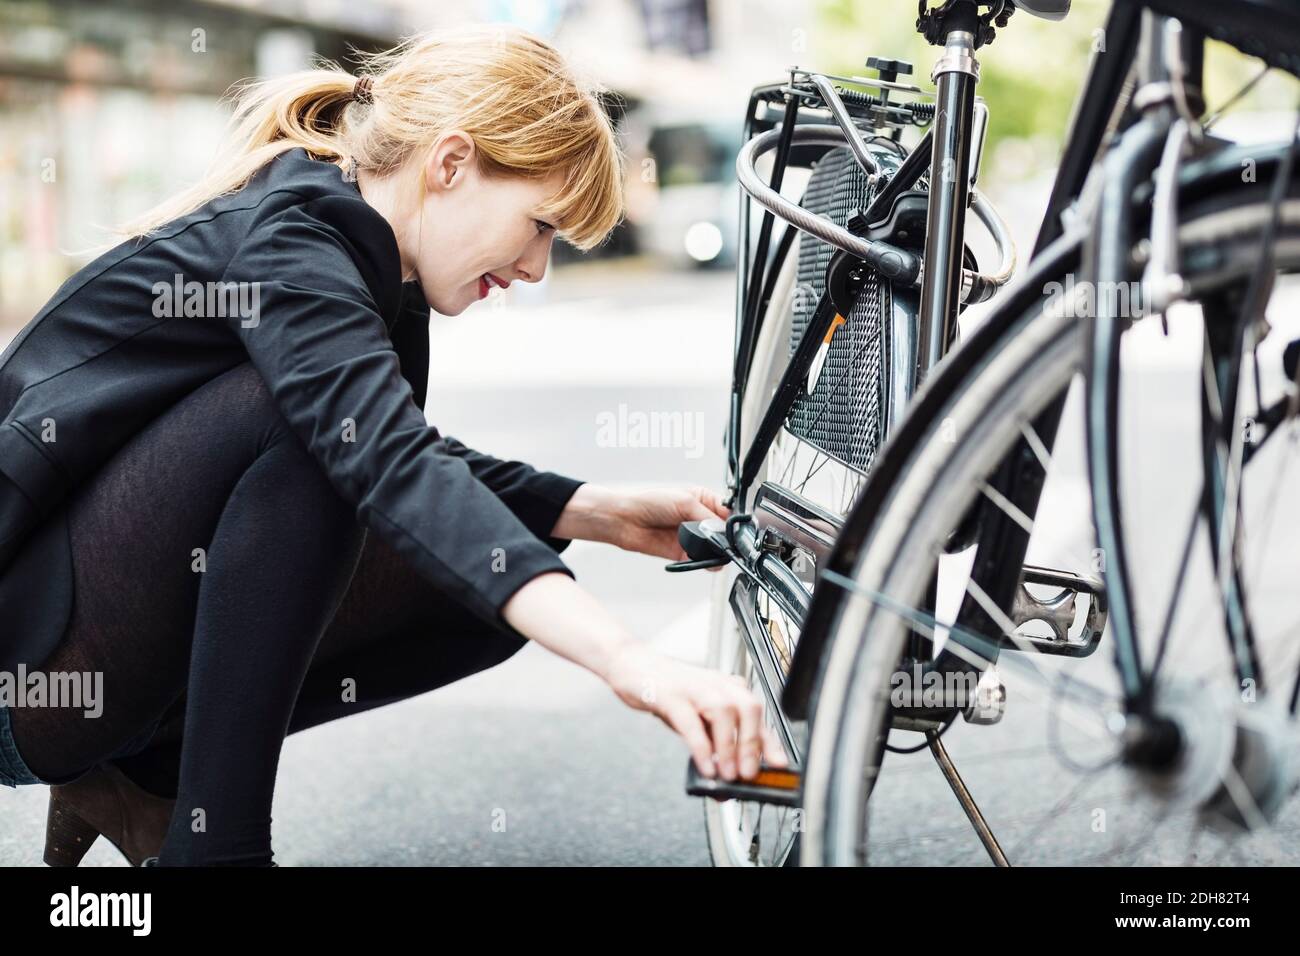 Side view of businesswoman repairing bicycle on street Stock Photo